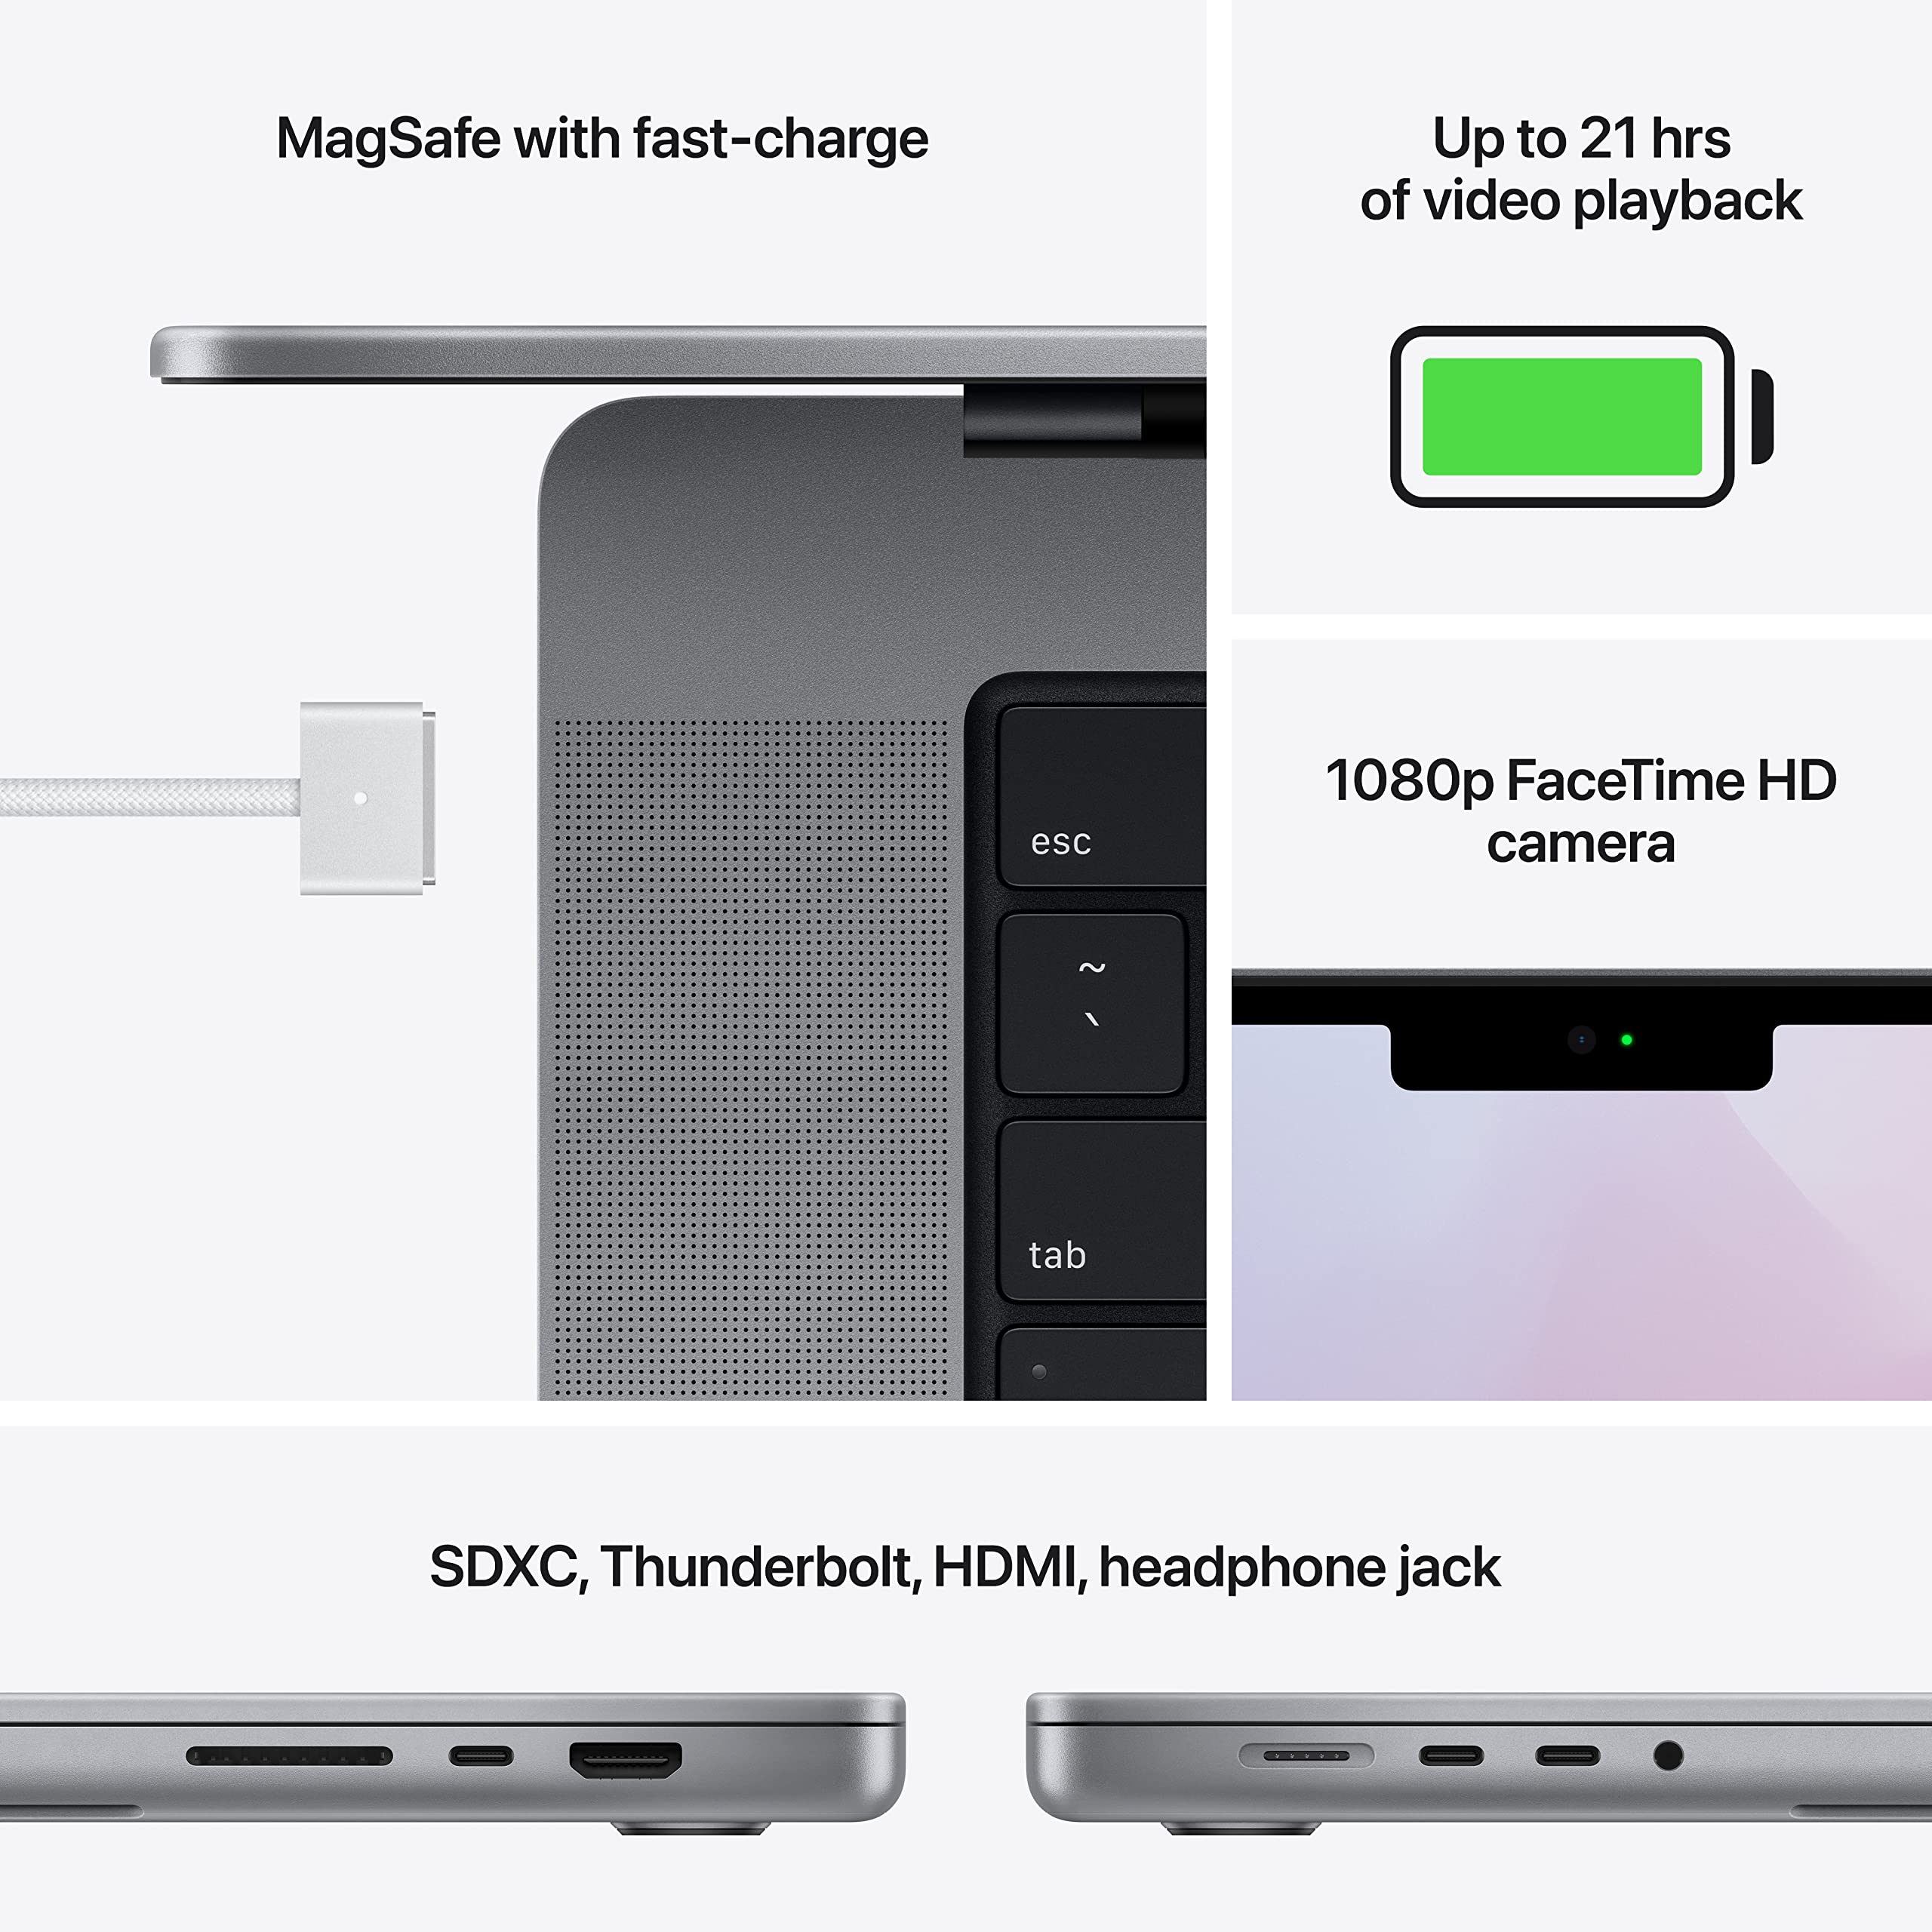 2021 Apple MacBook Pro (16-inch, Apple M1 Pro chip with 10‑core CPU and 16‑core GPU, 16GB RAM, 512GB SSD) - Space Grey